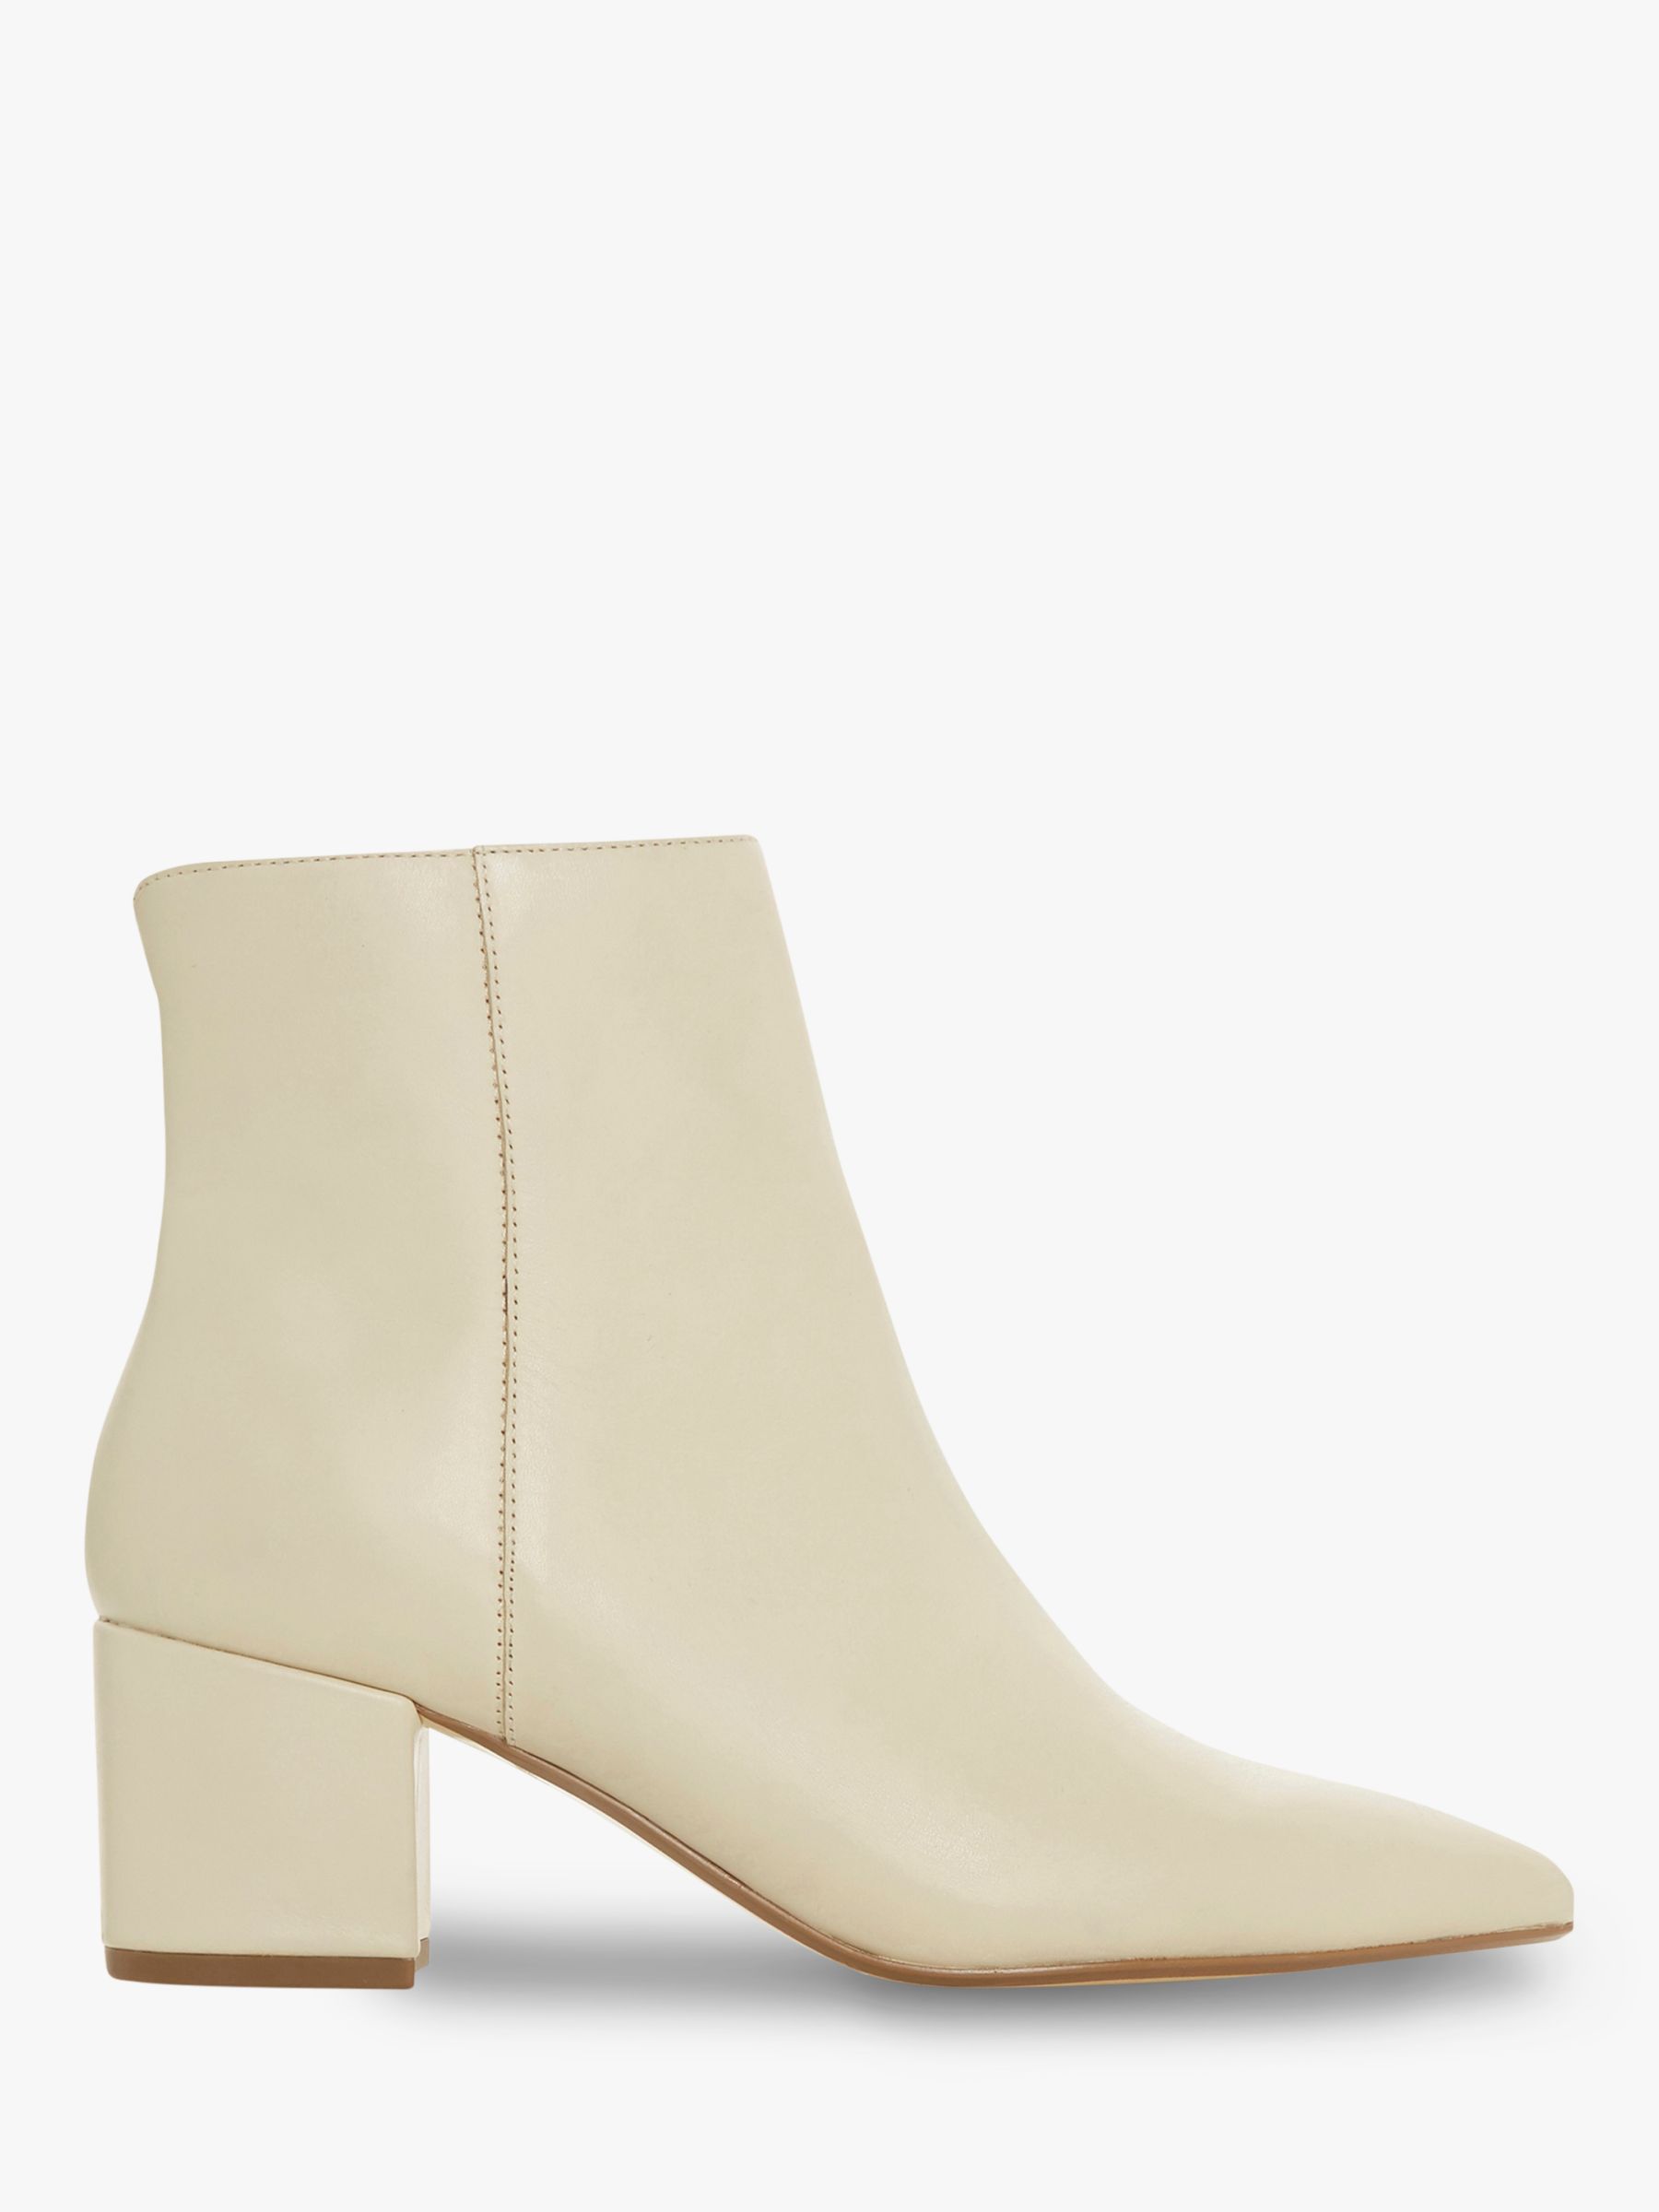 cream leather ankle boots uk